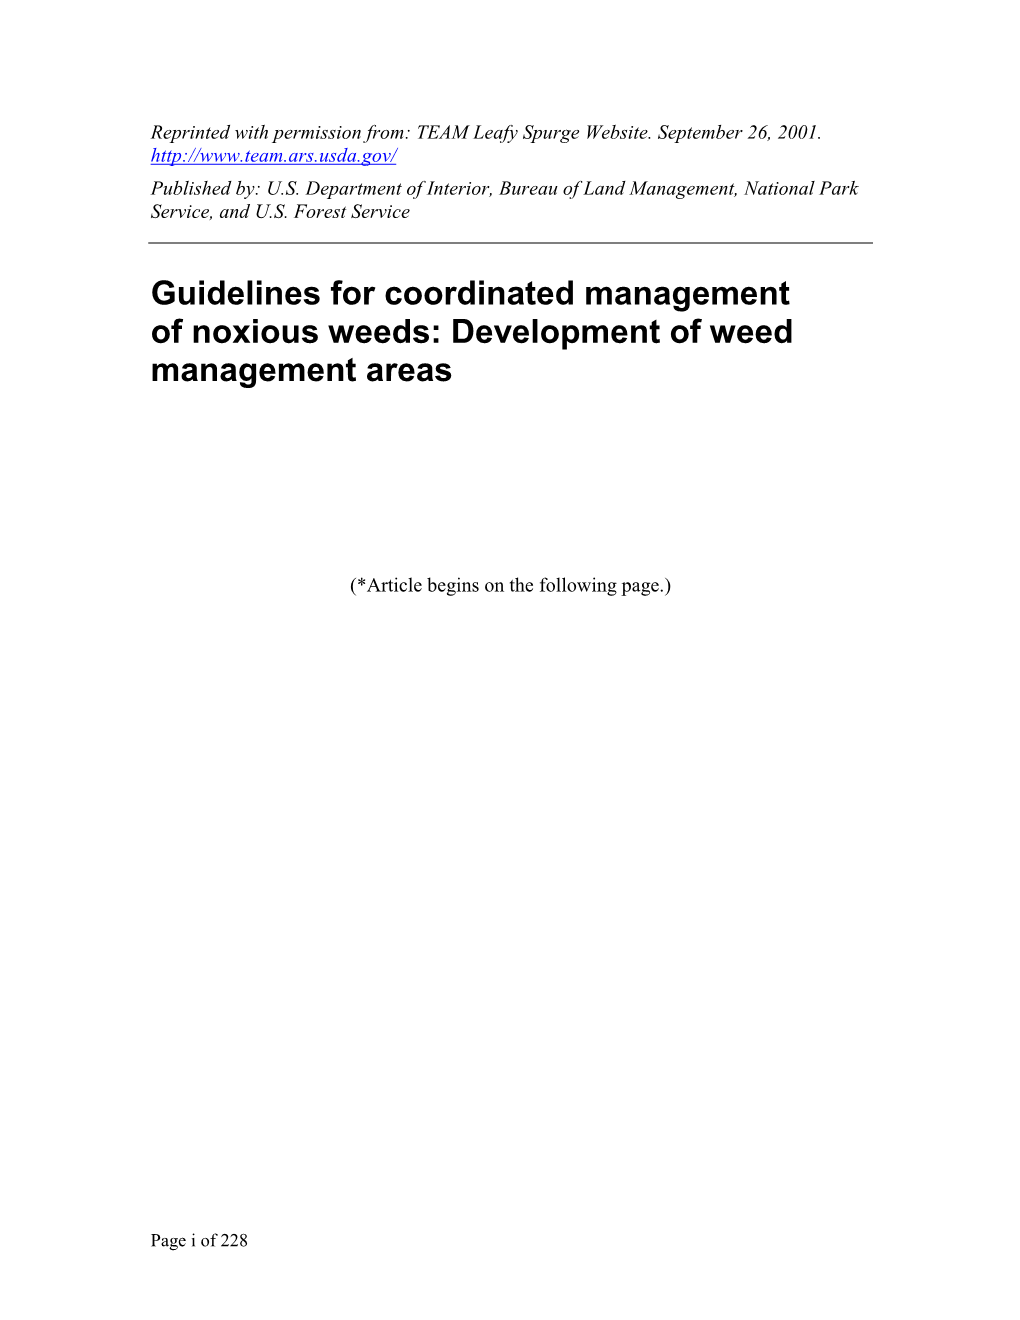 Guidelines for Coordinated Management of Noxious Weeds: Development of Weed Management Areas